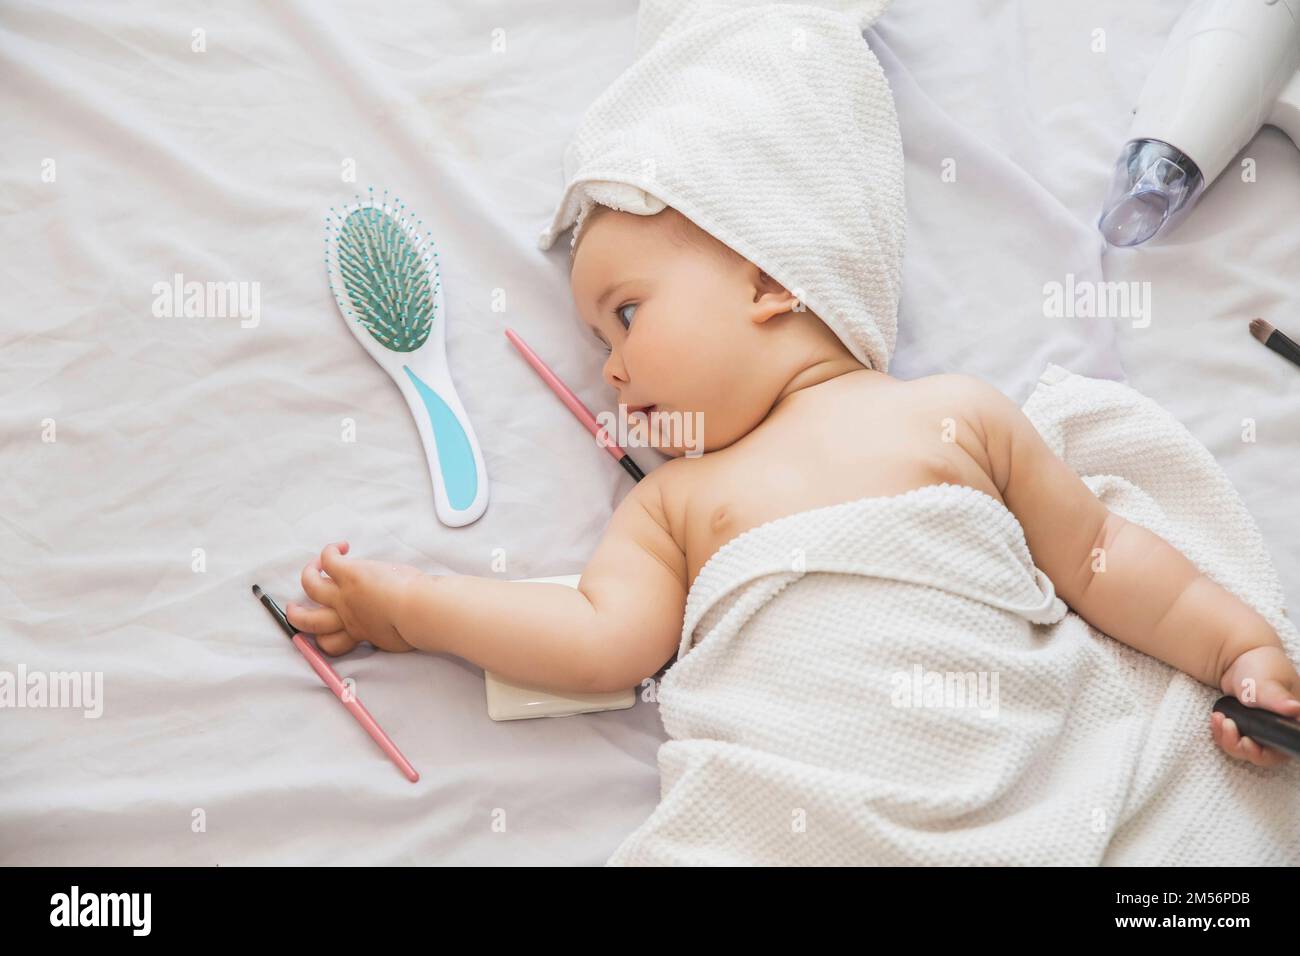 baby with towel on her head lies near the hairdryer,cosmetics and comb Stock Photo